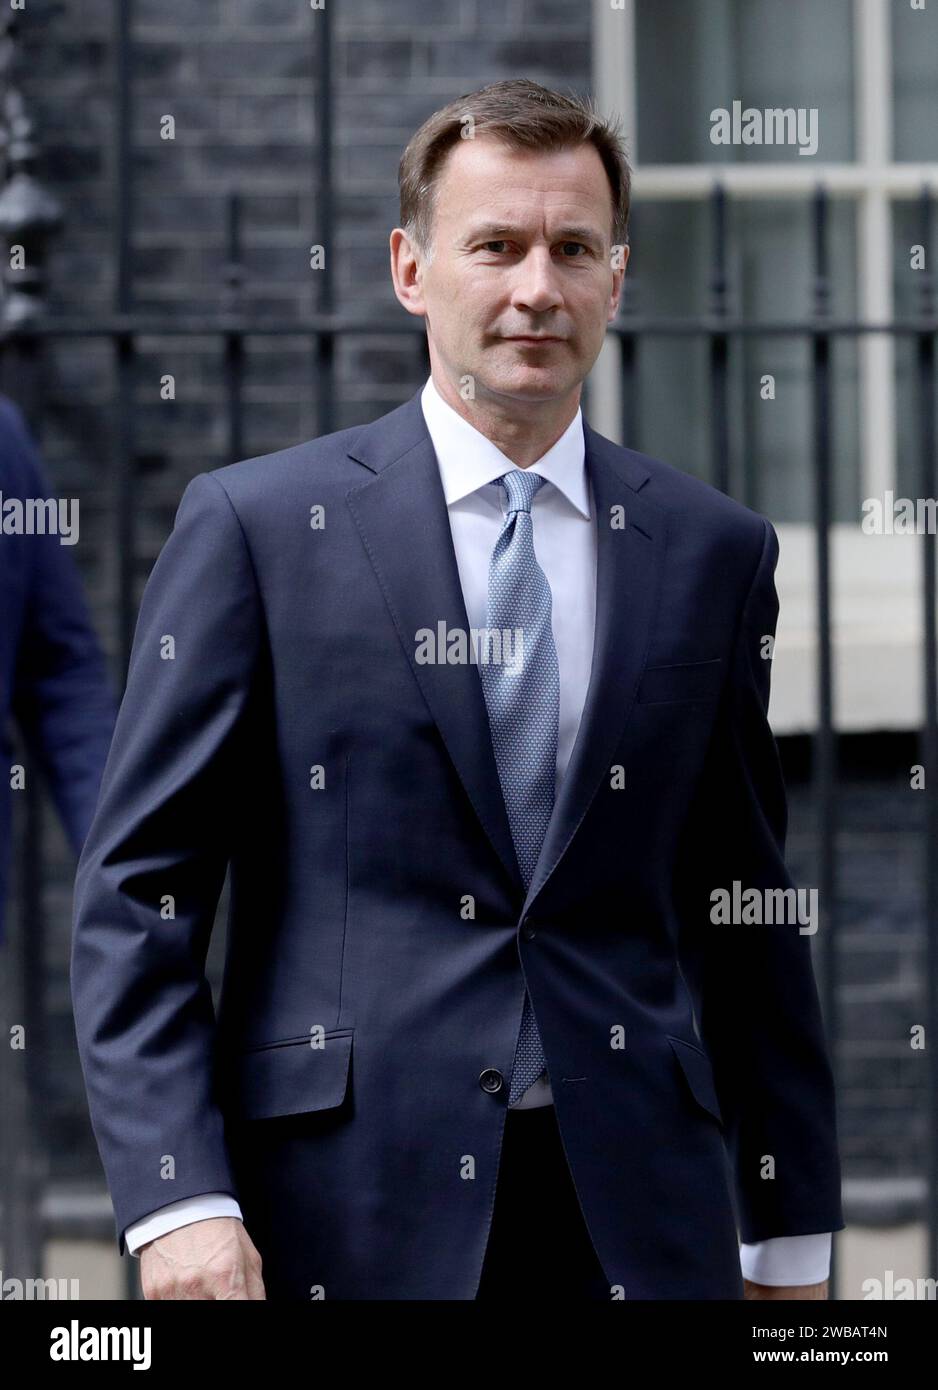 File photo dated 20/07/19 of Chancellor of the Exchequer Jeremy Hunt who said he is 'bitterly disappointed' after a Court of Appeal ruling gave the green light to a gas drilling project at Dunsfold in his Surrey constituency. Issue date: Saturday July 20, 2019. Stock Photo